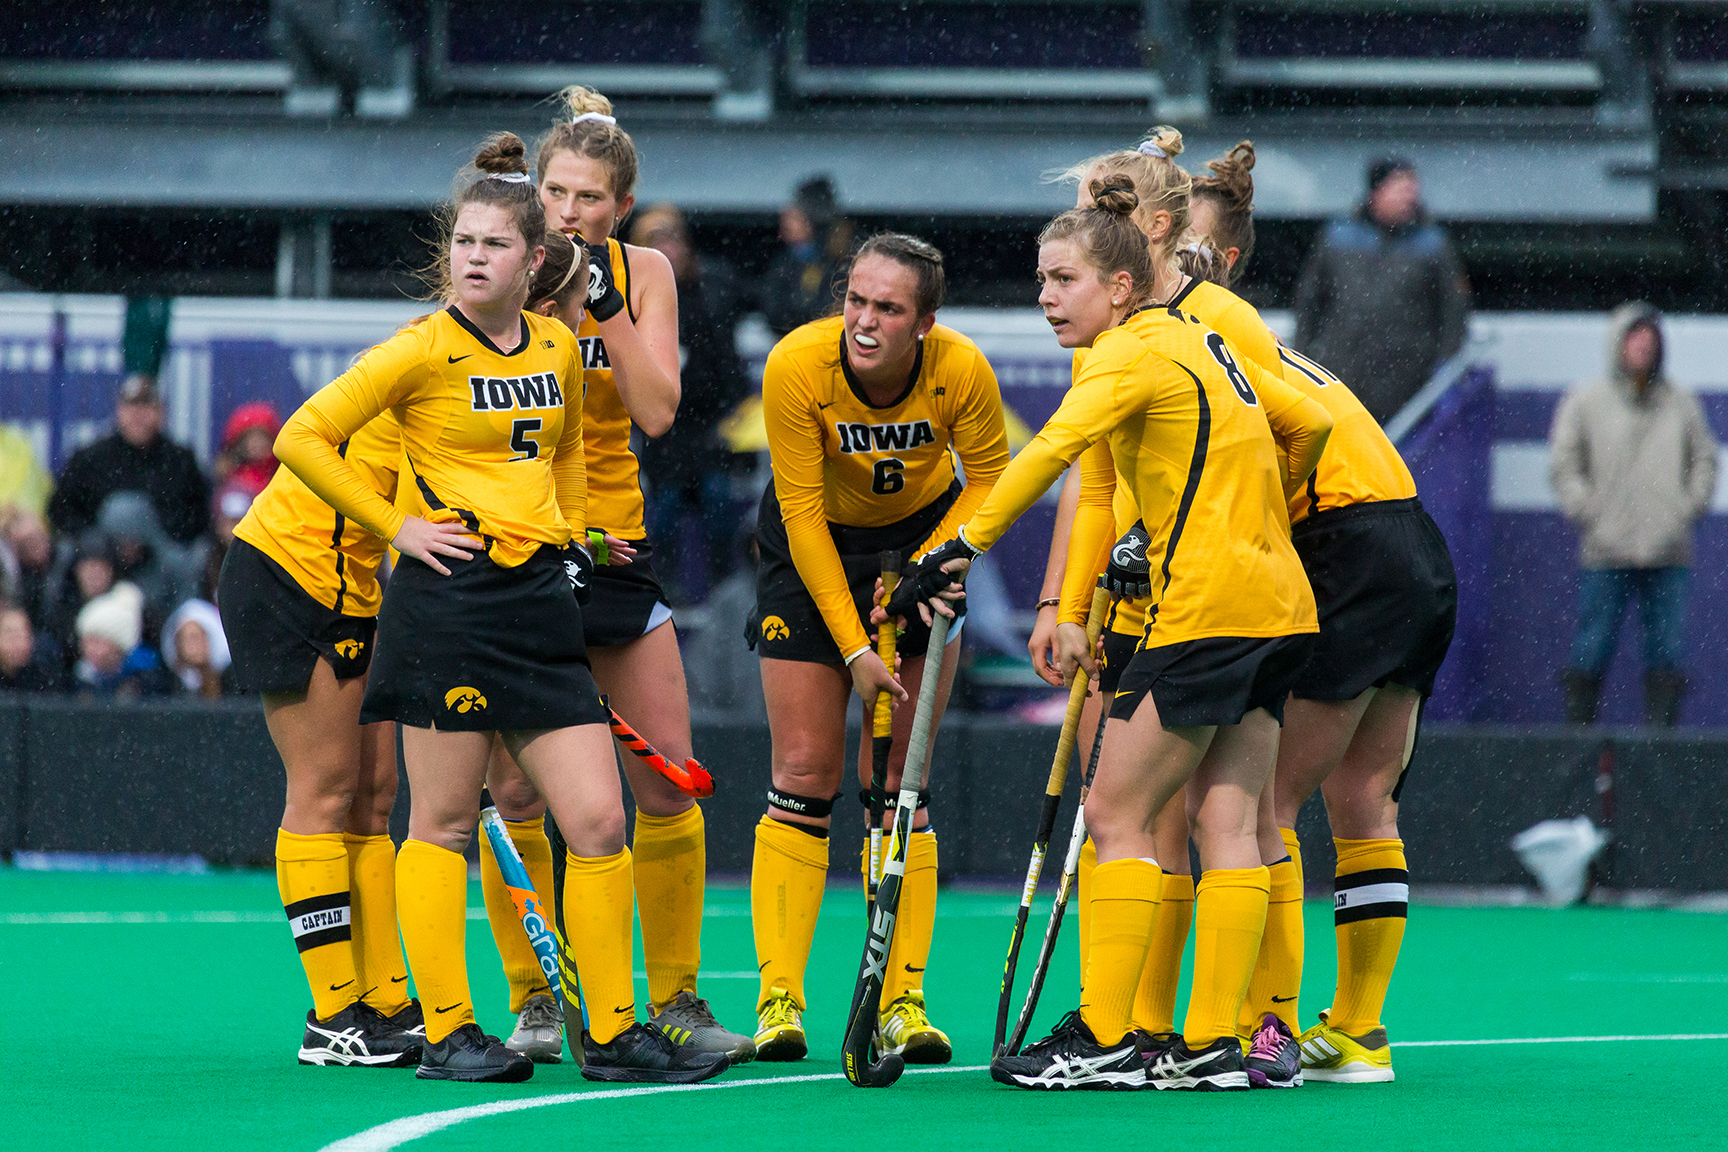  Iowa players look back at their bench during the Championship Game in the Big Ten Field Hockey Tournament at Lakeside Field in Evanston, IL on Sunday, Nov. 3, 2018. The no. 2 ranked Terrapins defeated the no. 8 ranked Hawkeyes 2-1.  